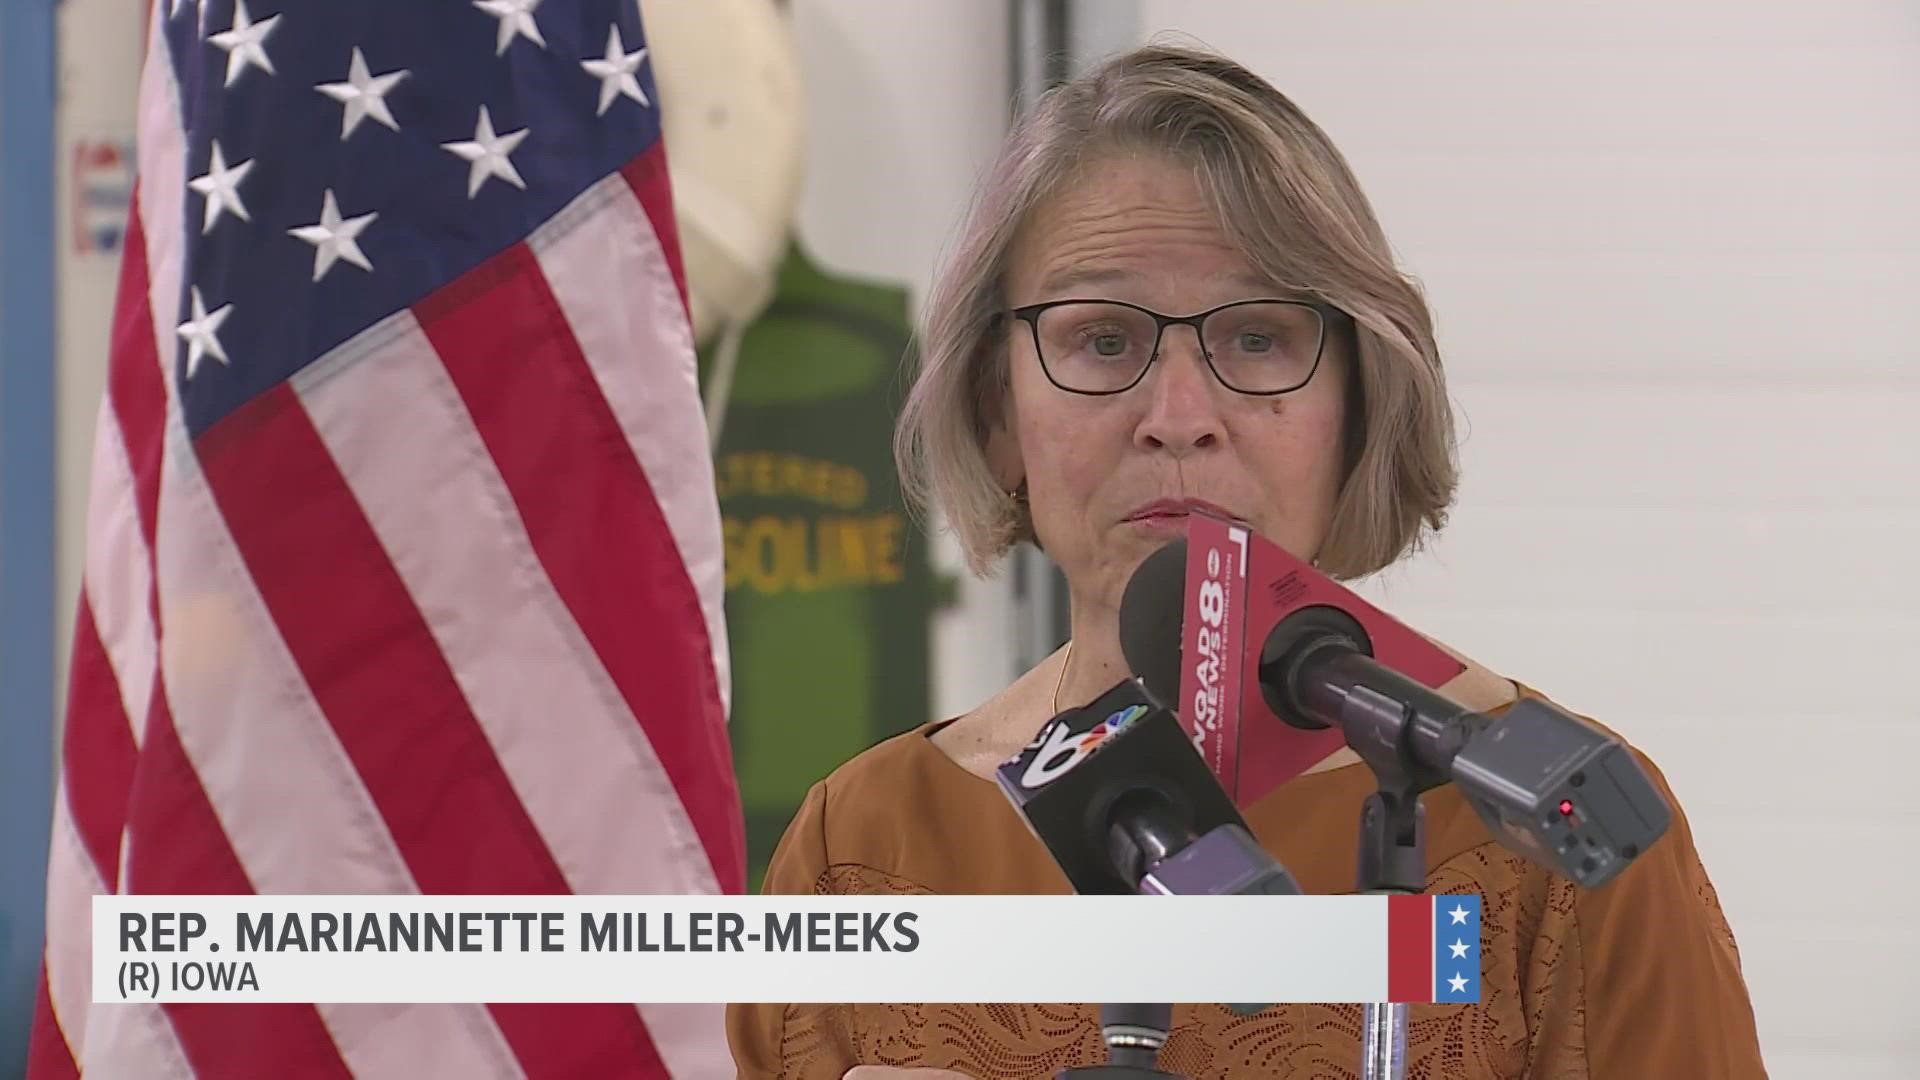 Miller-Meeks currently represents Iowa's 2nd Congressional District.